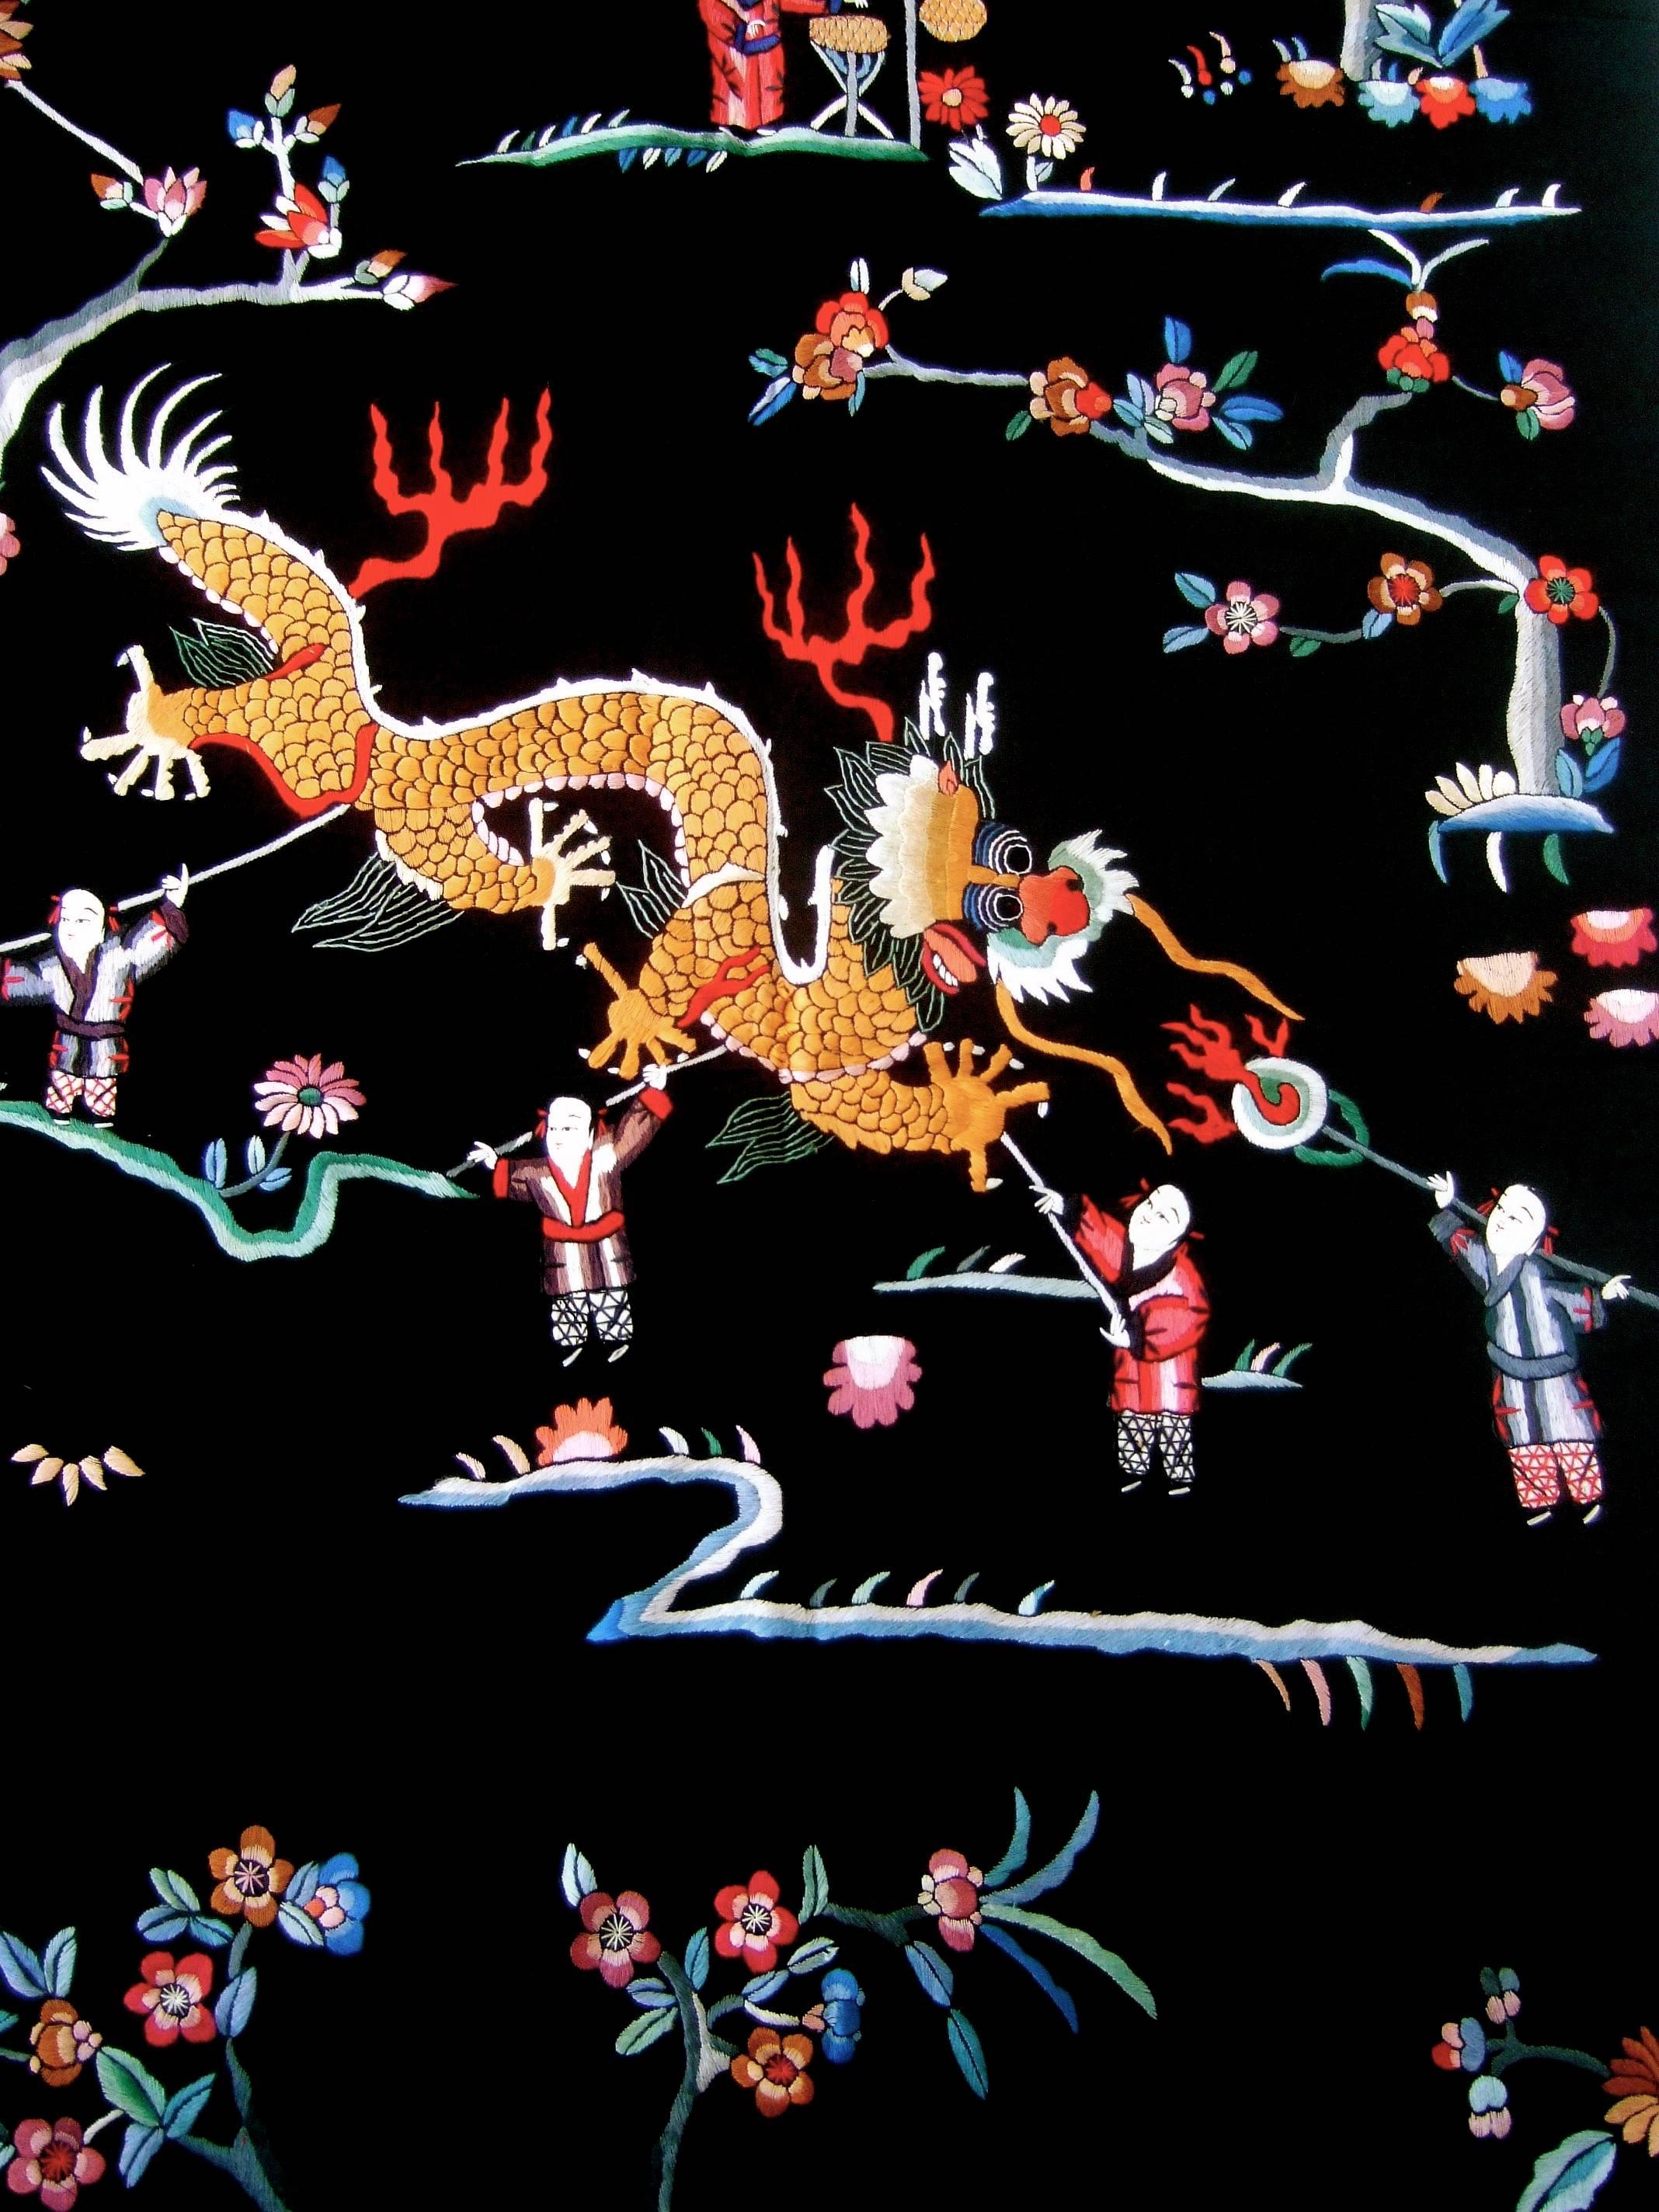 Exotic embroidered Asian theme pair of satin fabric panels c 1970s
The black satin panels are illuminated with intricate floral,
and figural hand embroidery 

Embellished with pair of mythical fire breathing dragons 
presiding over the garden of